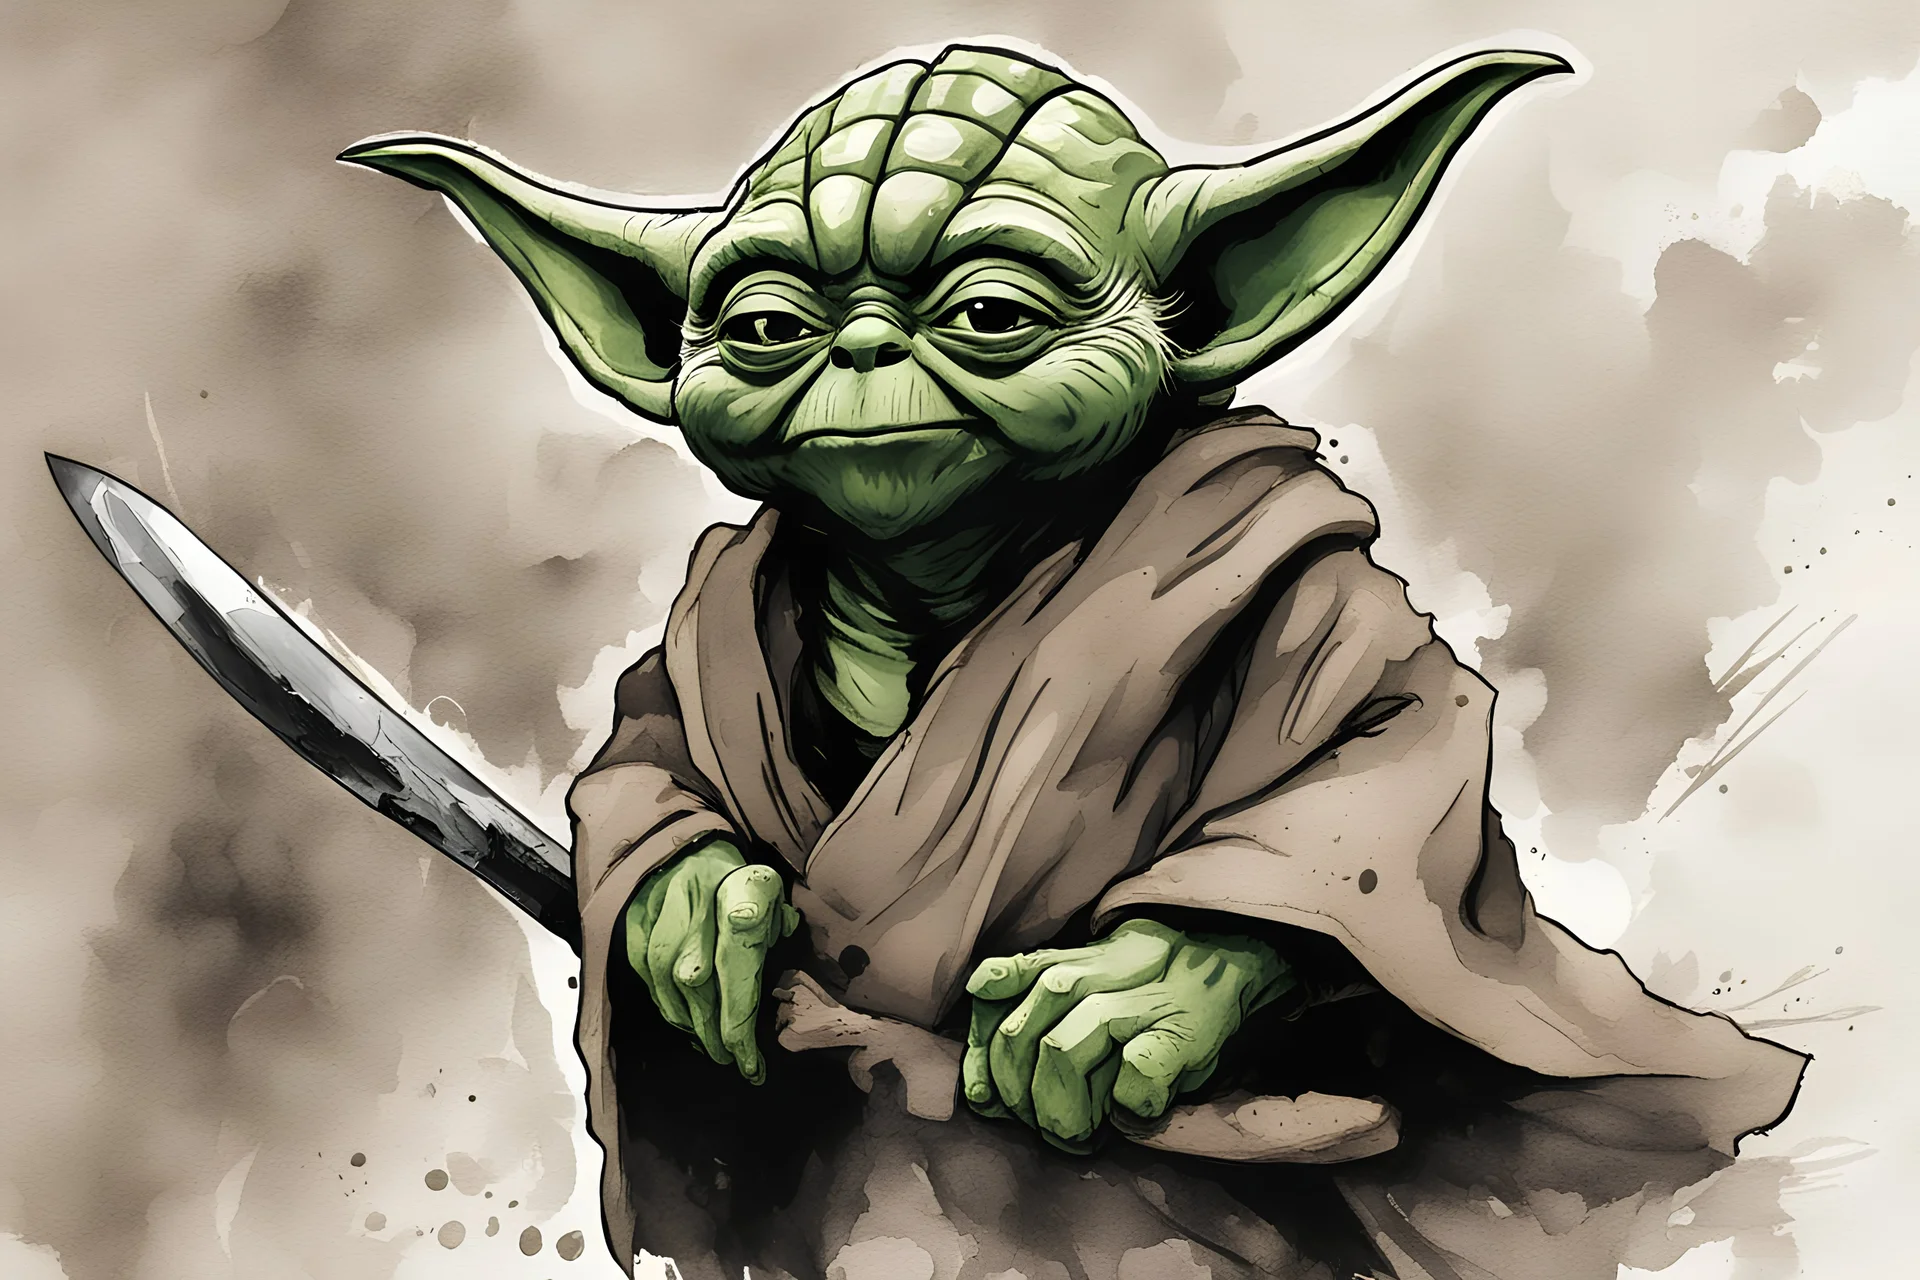 yoda shaped axe, create in inkwash and watercolor, in the comic book art style, highly detailed, gritty textures,